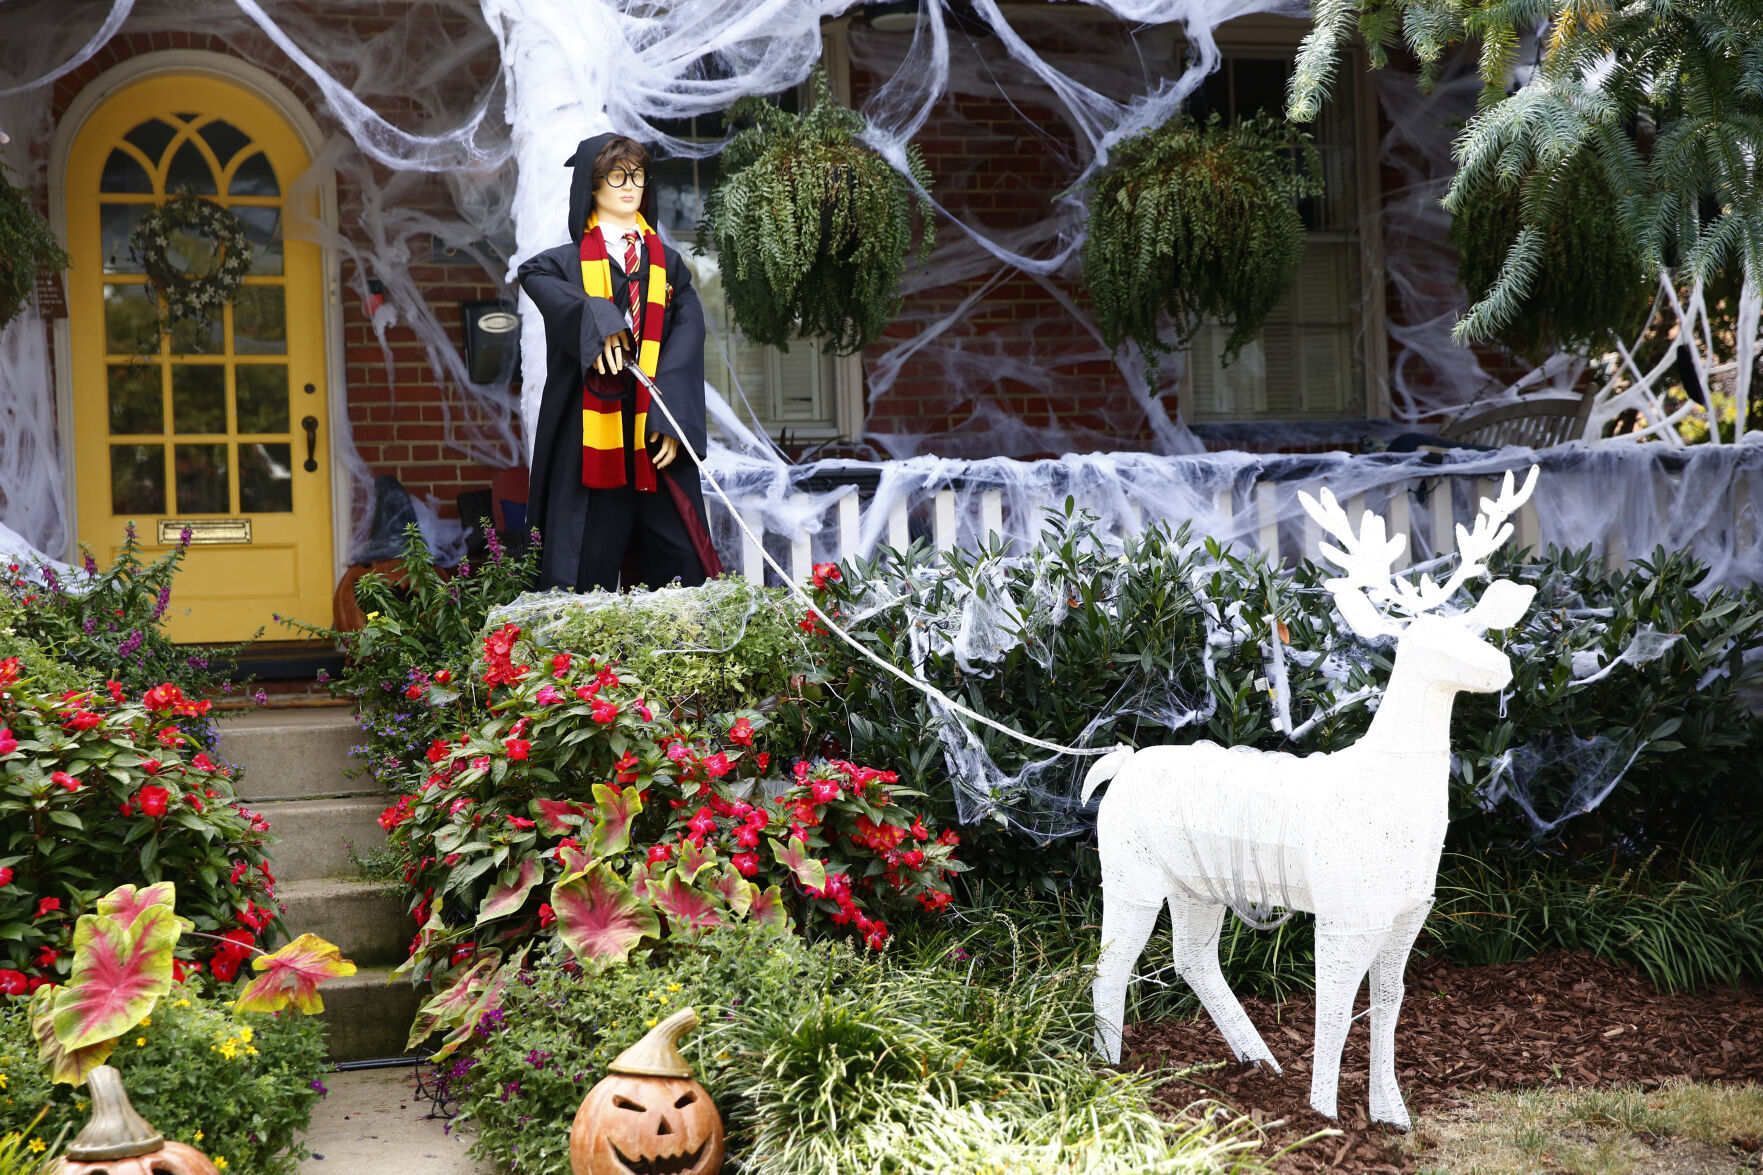 Must-see Halloween houses in Richmond area: Harry Potter house, Hellraiser house & giant skeletons